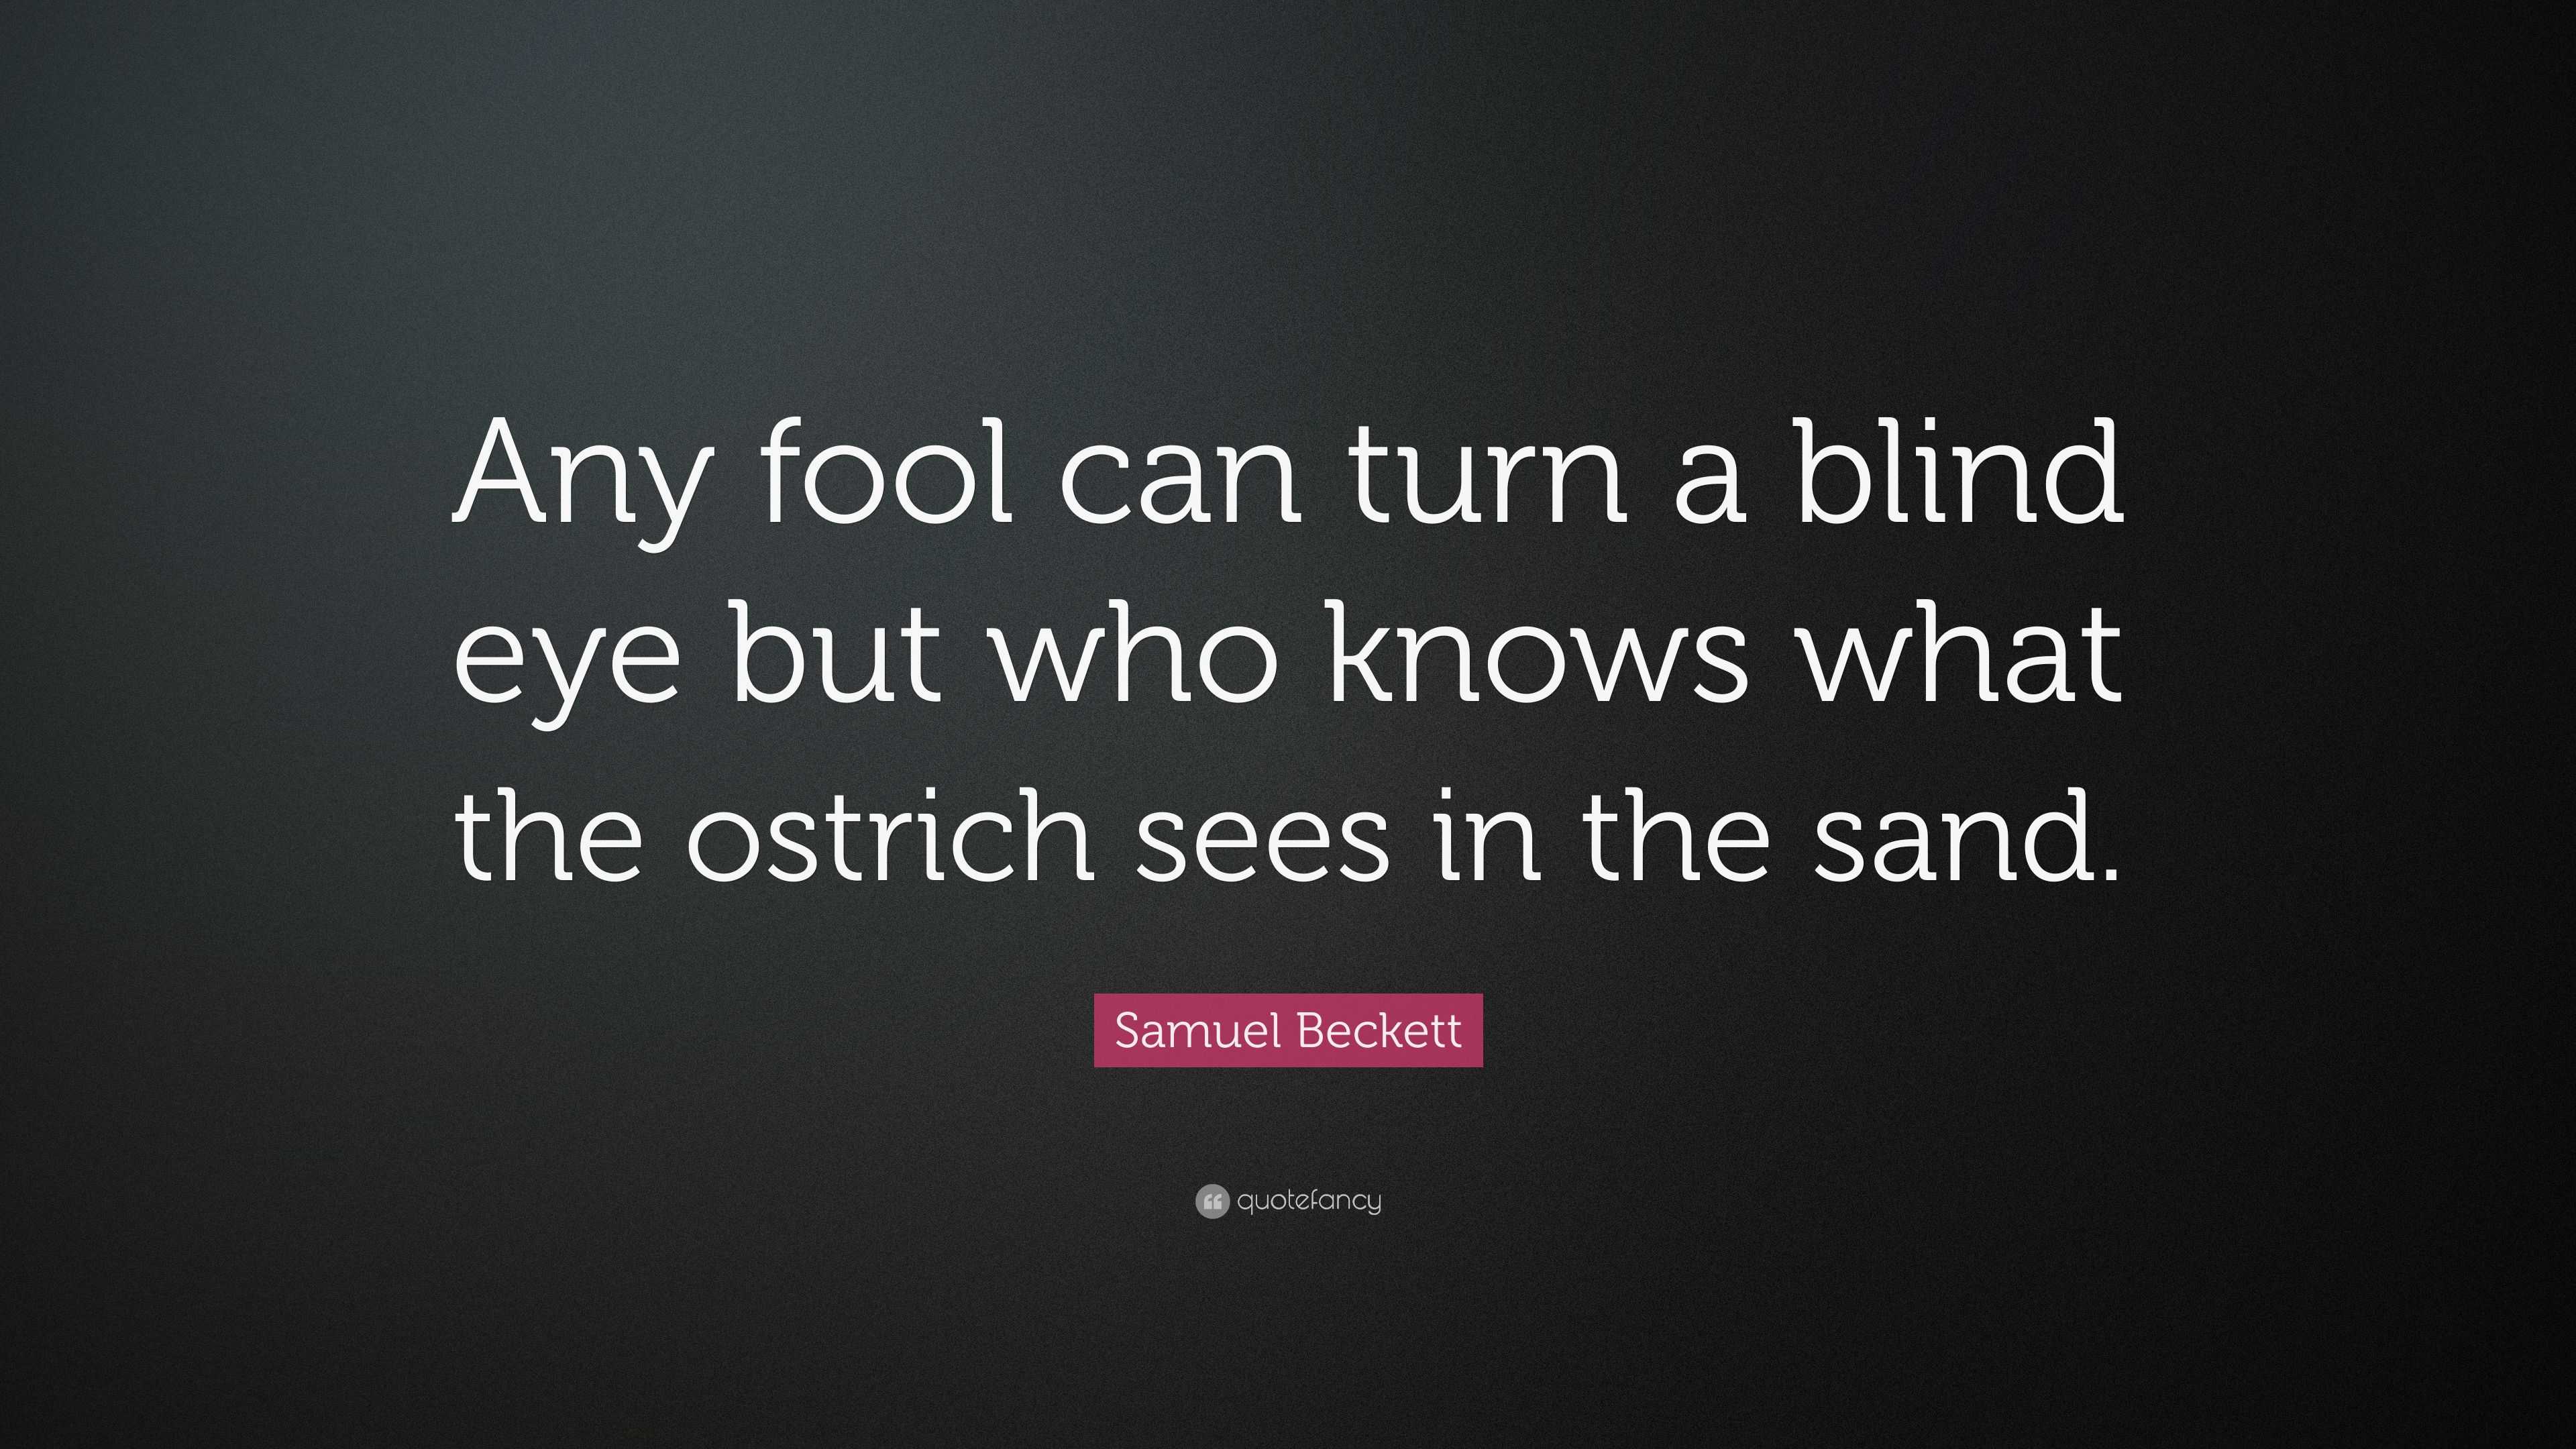 Samuel Beckett Quote: "Any fool can turn a blind eye but who knows what the ostrich sees in the ...